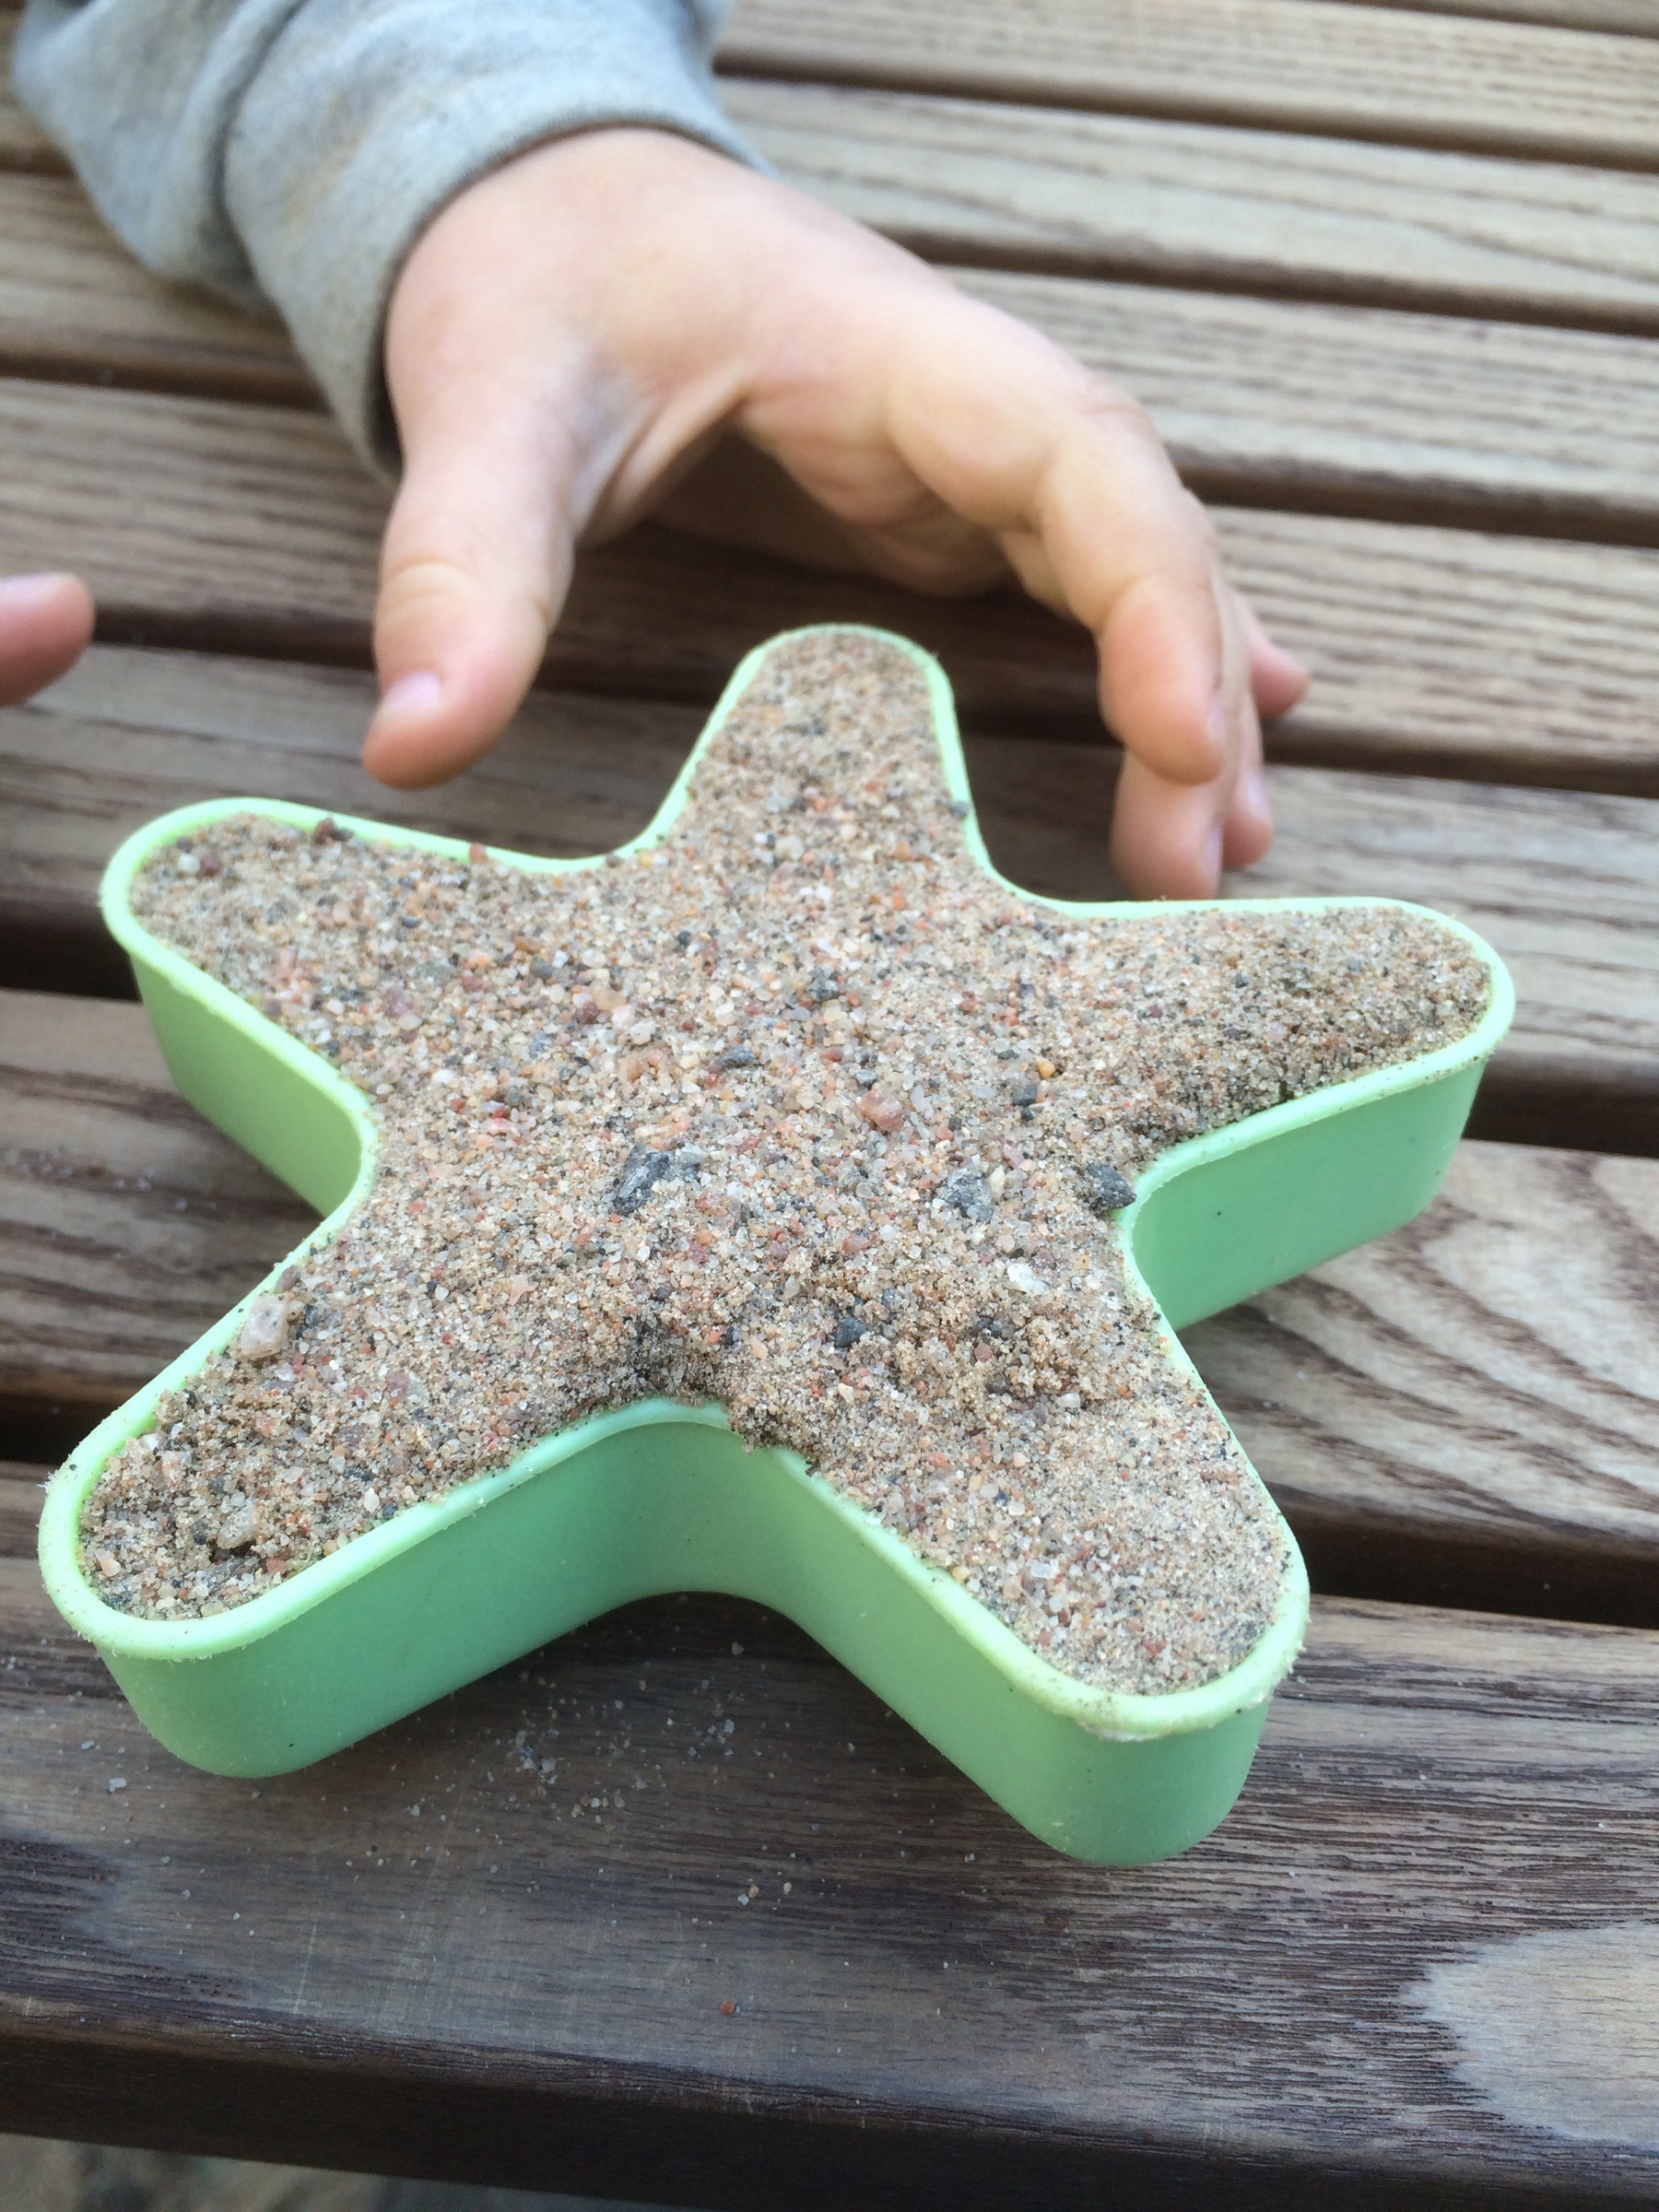 star shaped mold full of sand. delicious looking sand cake and a hand